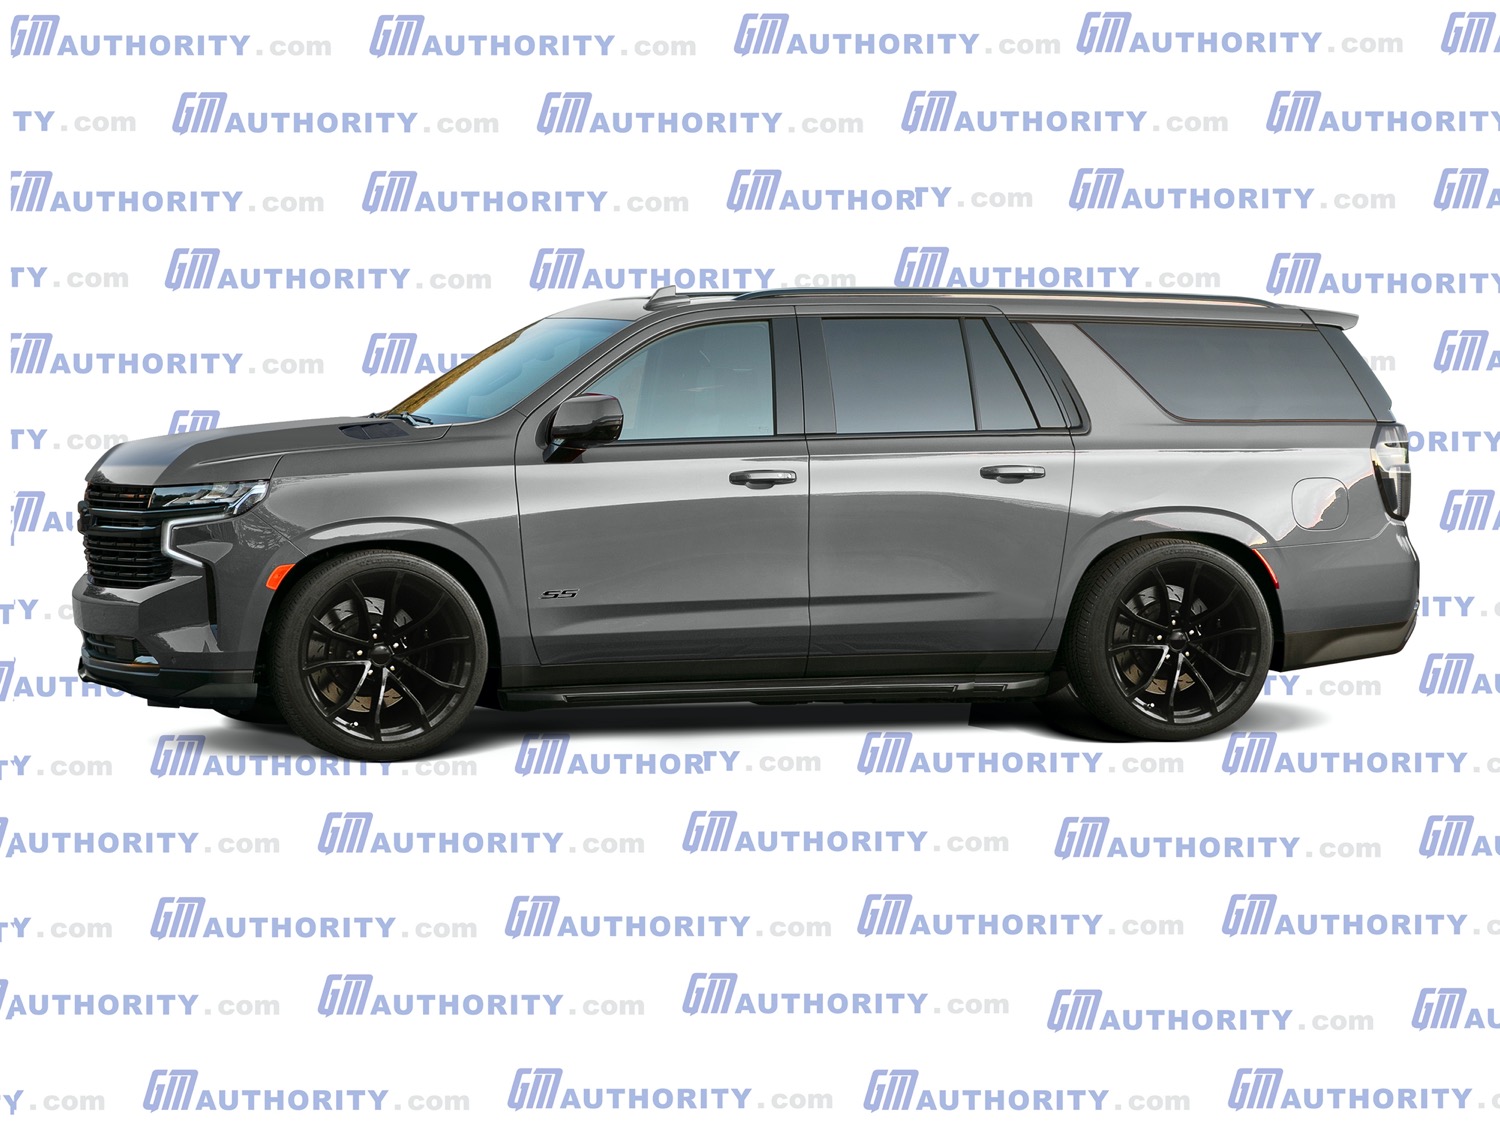 9 Chevy Suburban SS Rendered  GM Authority